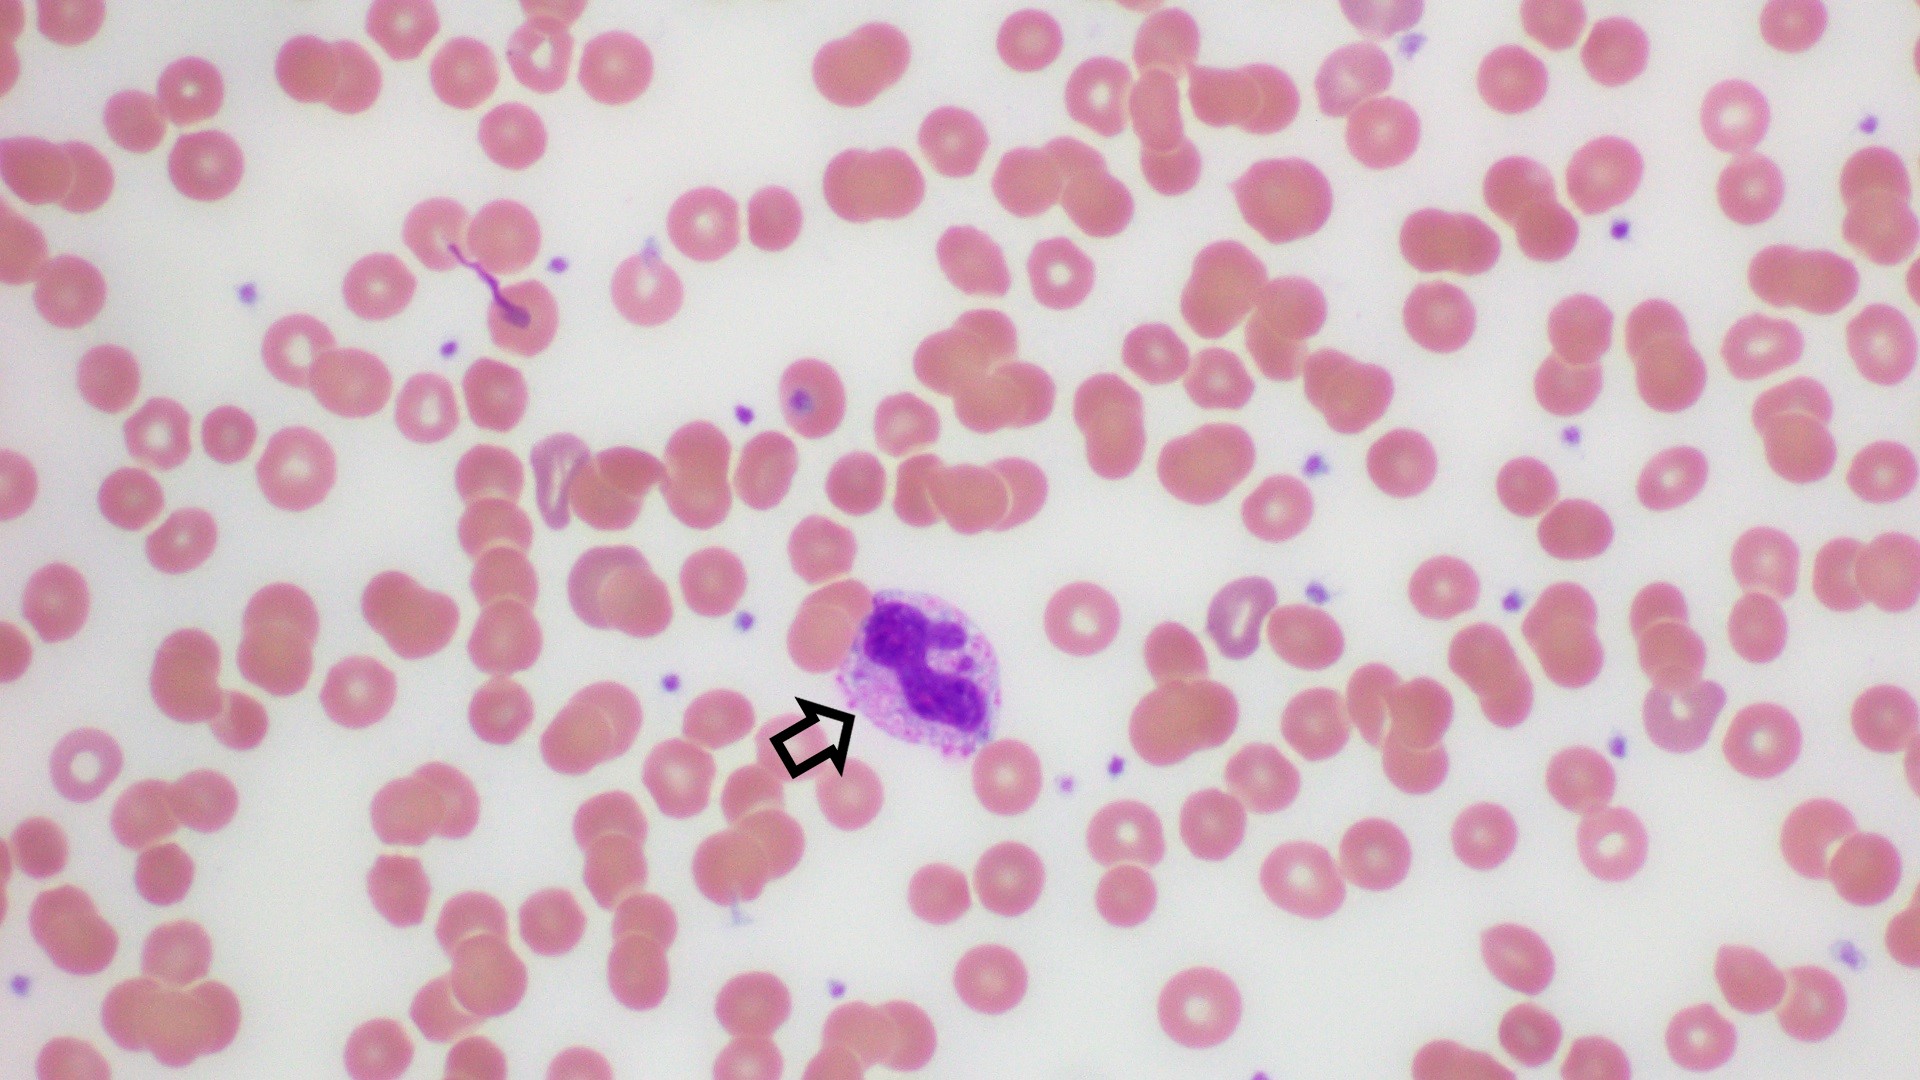 A Hematoxylin and Eosin (H&amp;E) stained slide showing Döhle bodies  that are light blue-gray, oval, basophilic, leukocyte inclusions located in the peripheral cytoplasm of neutrophil (arrow)